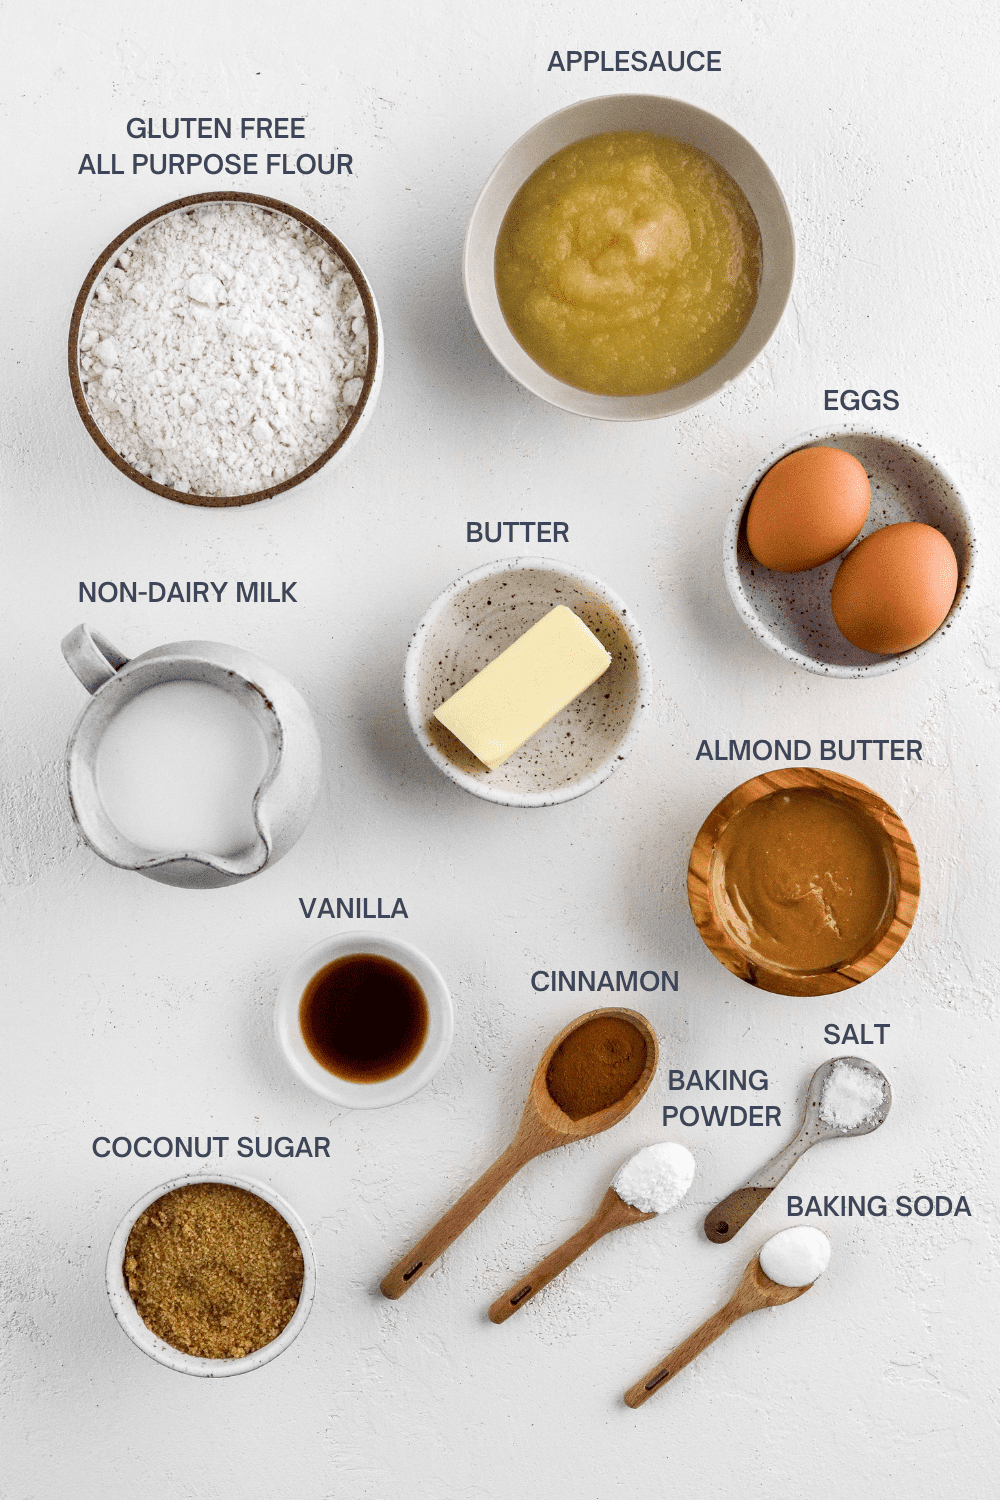 Bowl of flour next to a bowl of applesauce with a bowl with 2 eggs, plate with a stick of butter, cup of milk, brown bowl with almond butter, small bowl of vanilla and spoons with cinnamon, salt, baking powder and baking soda in them with labels for each ingredient all on a white surface. 